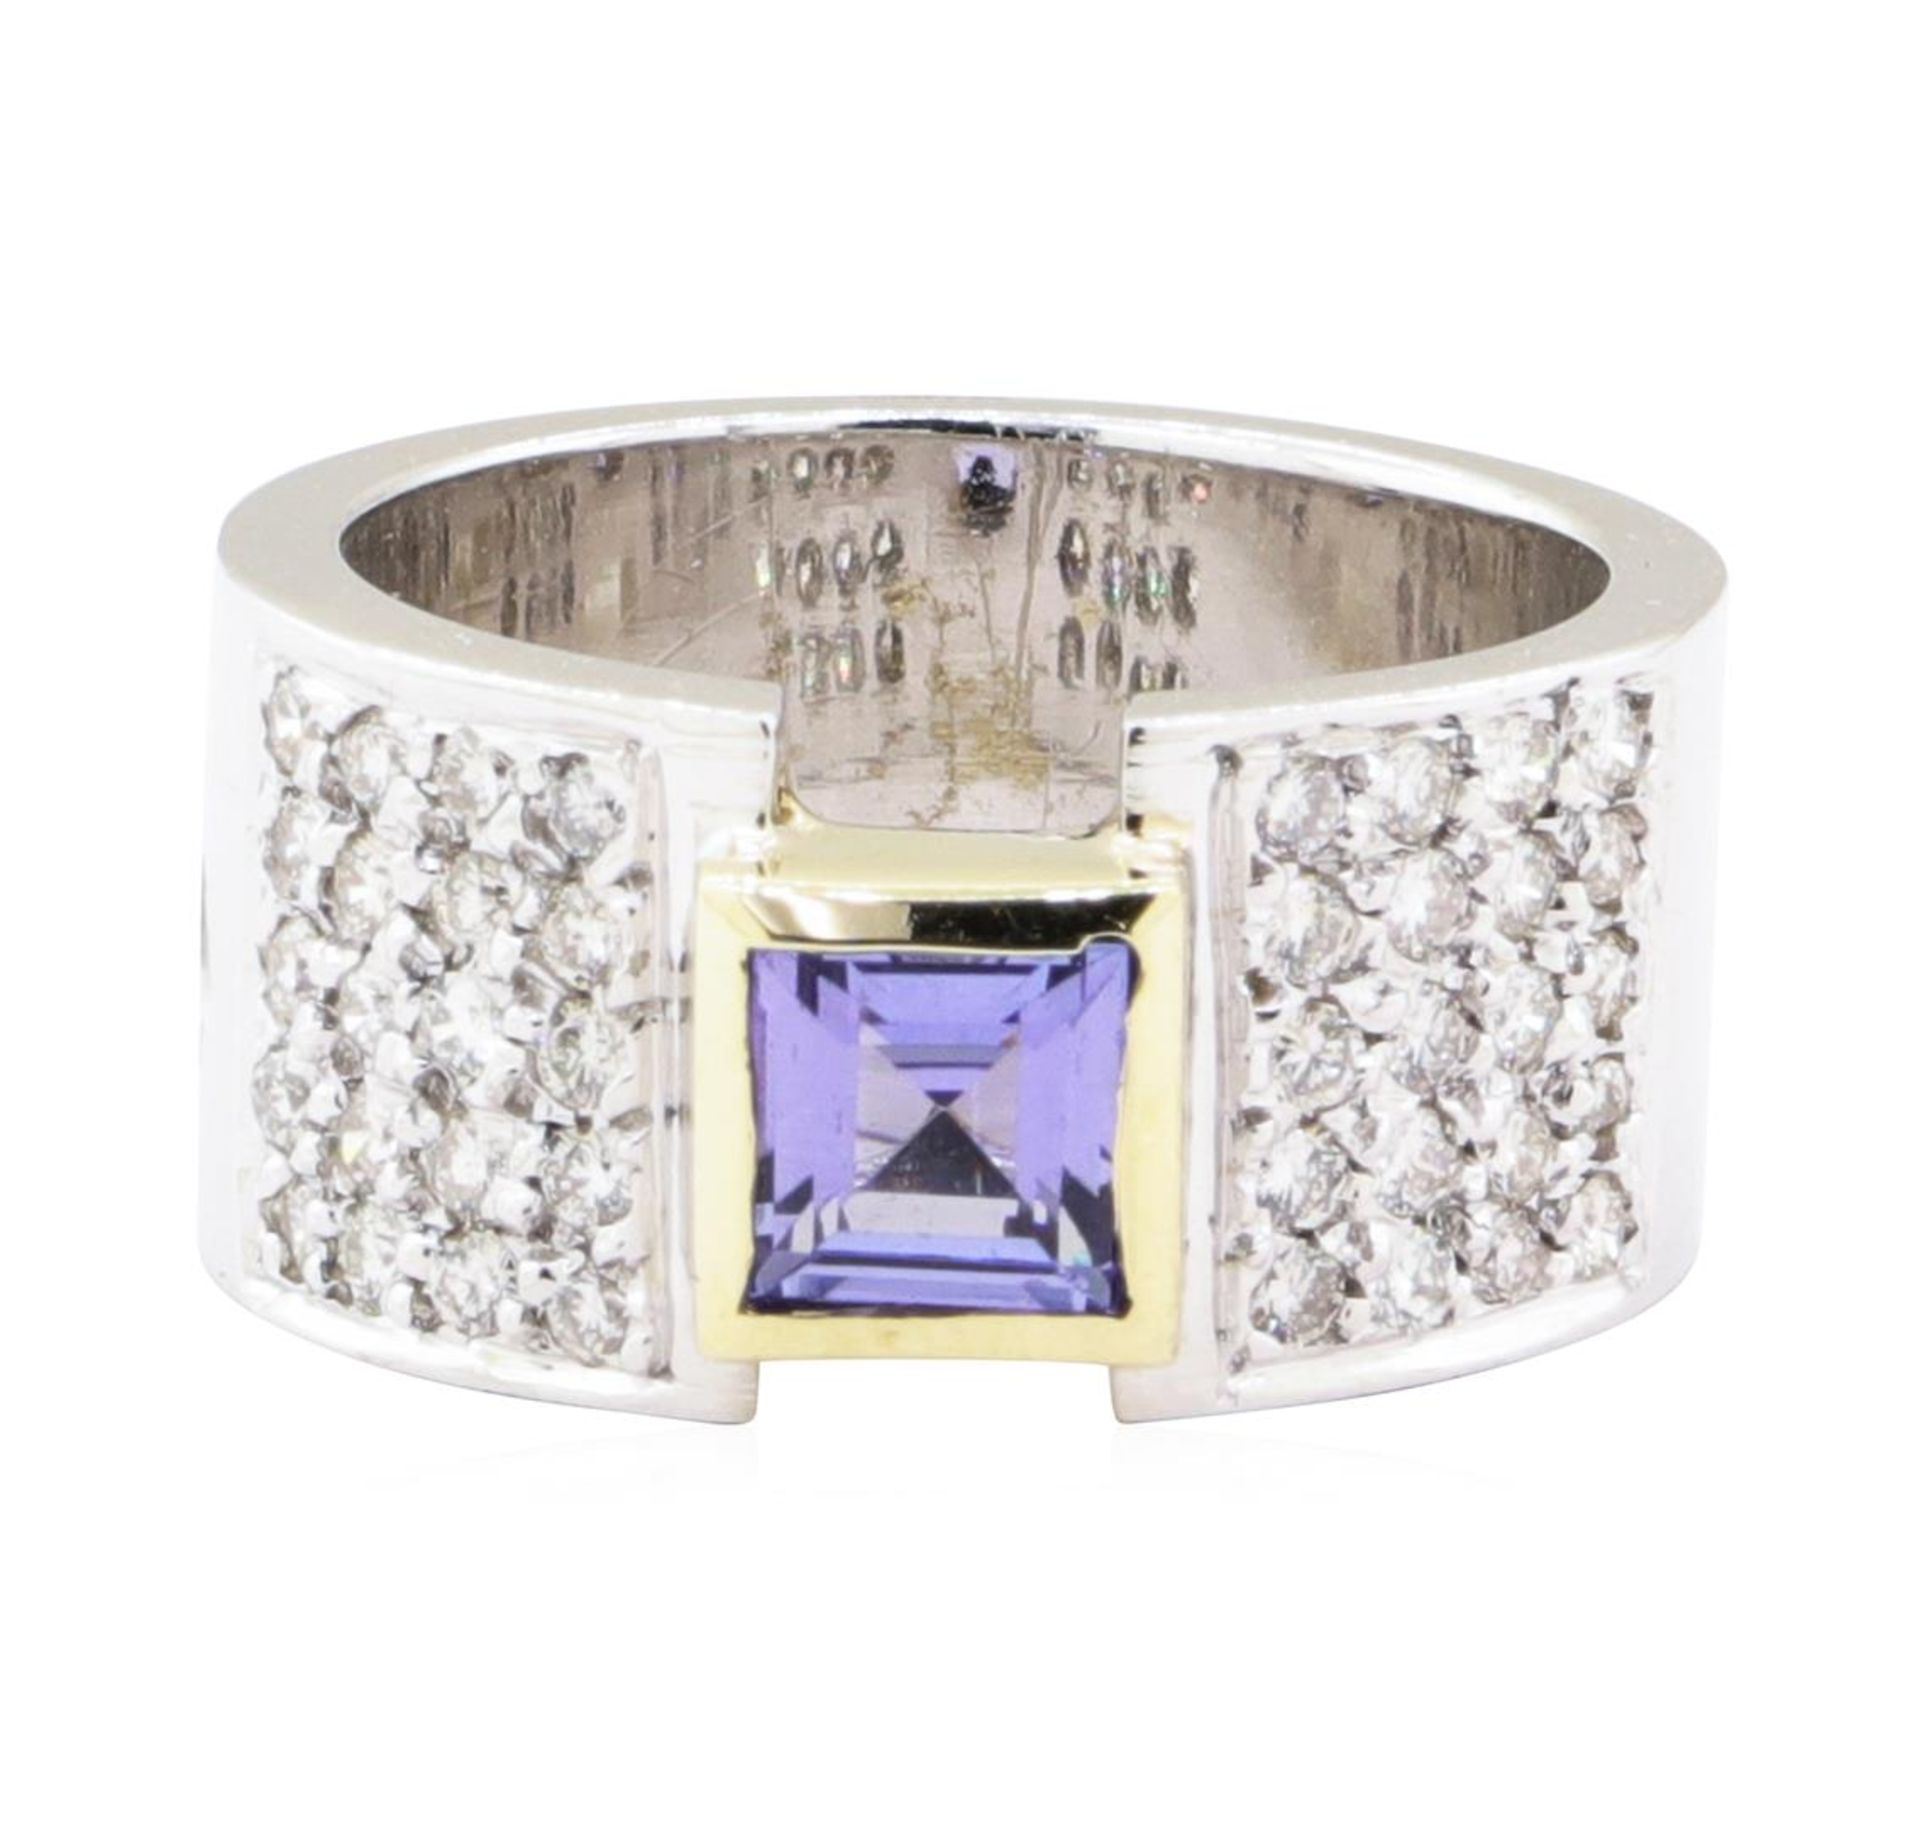 1.20 ctw Tanzanite And Diamond Ring - 14KT White And Yellow Gold - Image 2 of 5